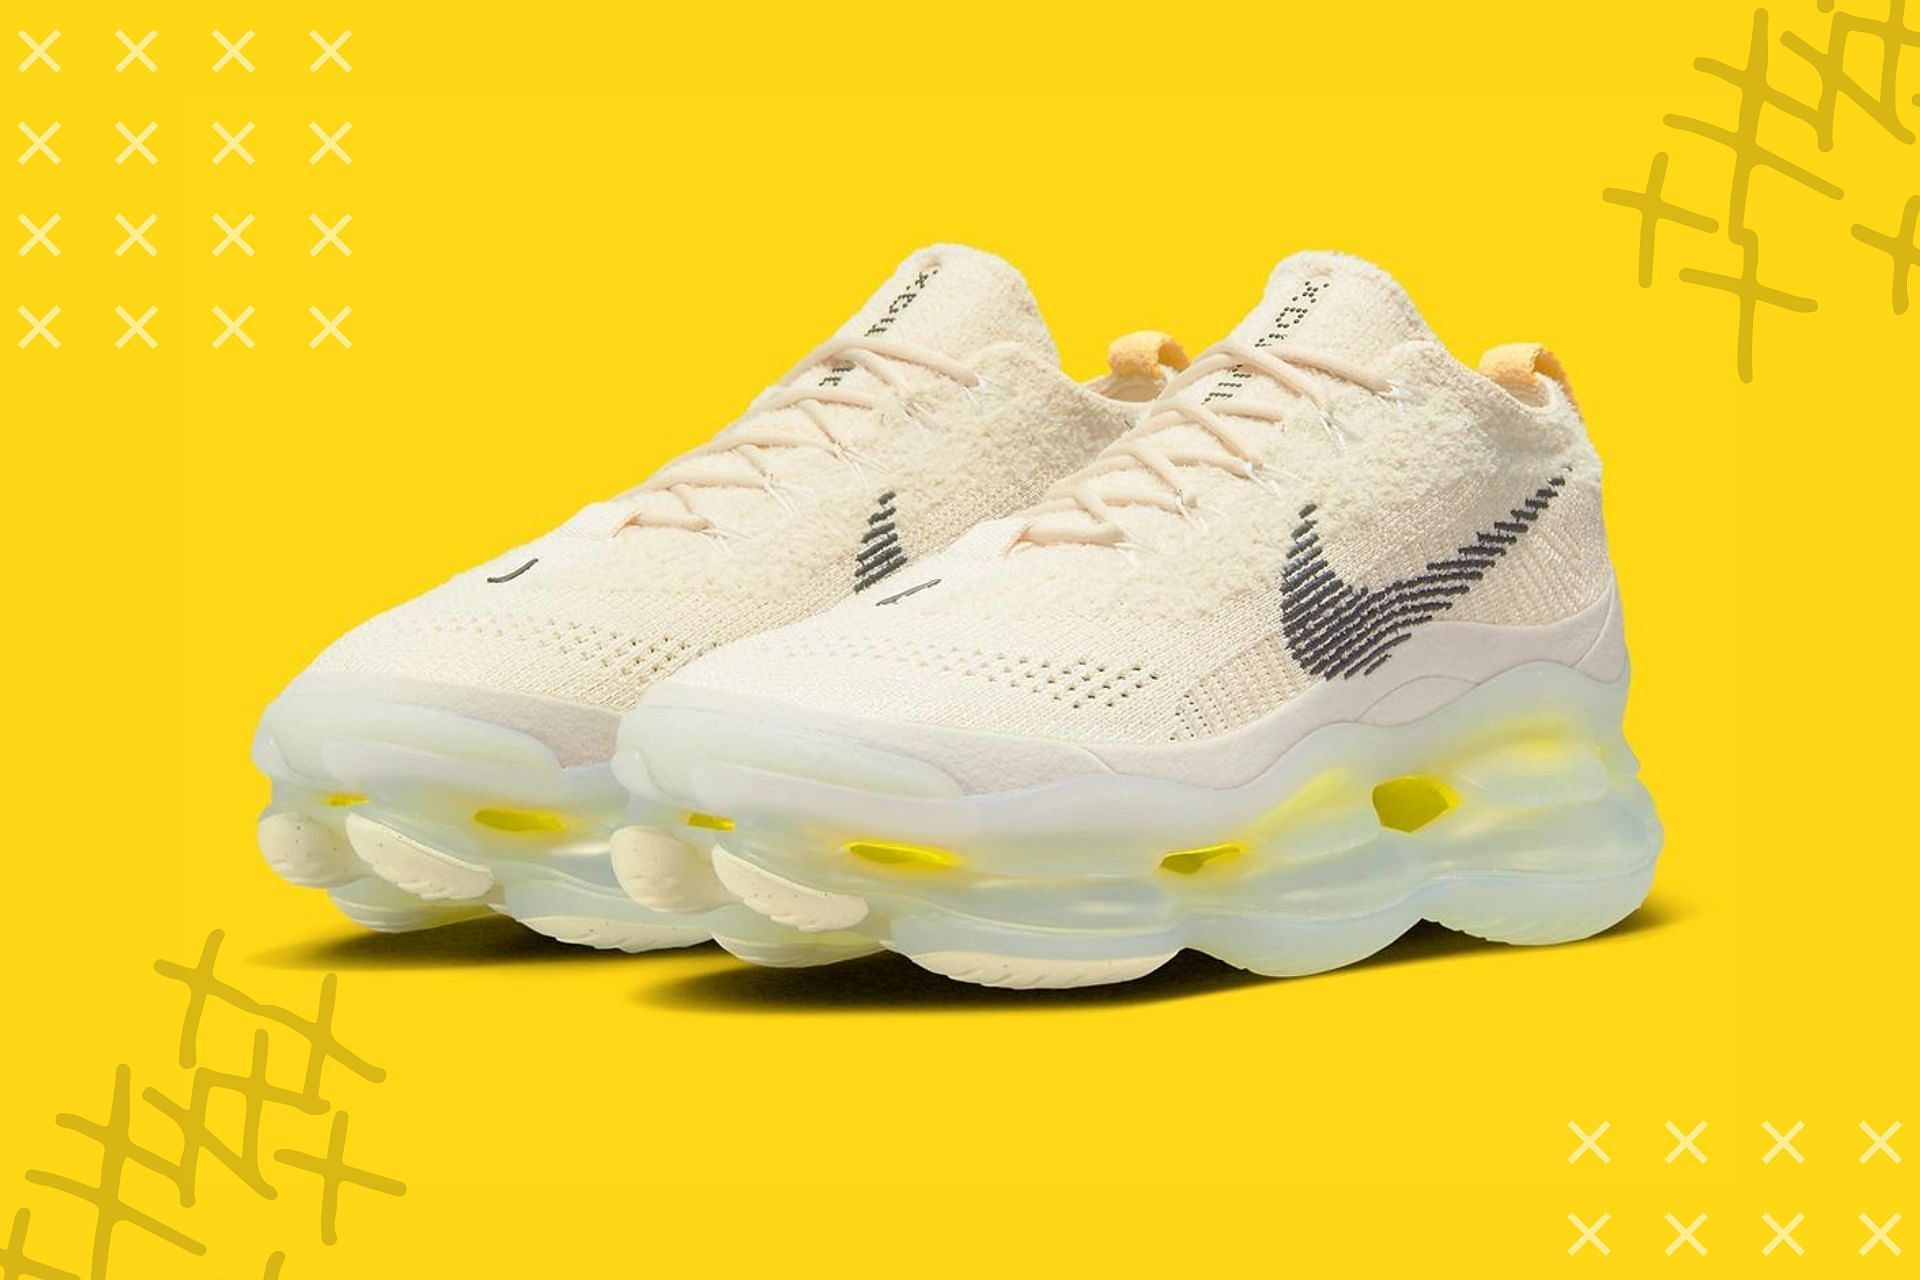 These shoes are also referred to as Lemon Wash colorway (Image via Sportskeeda)